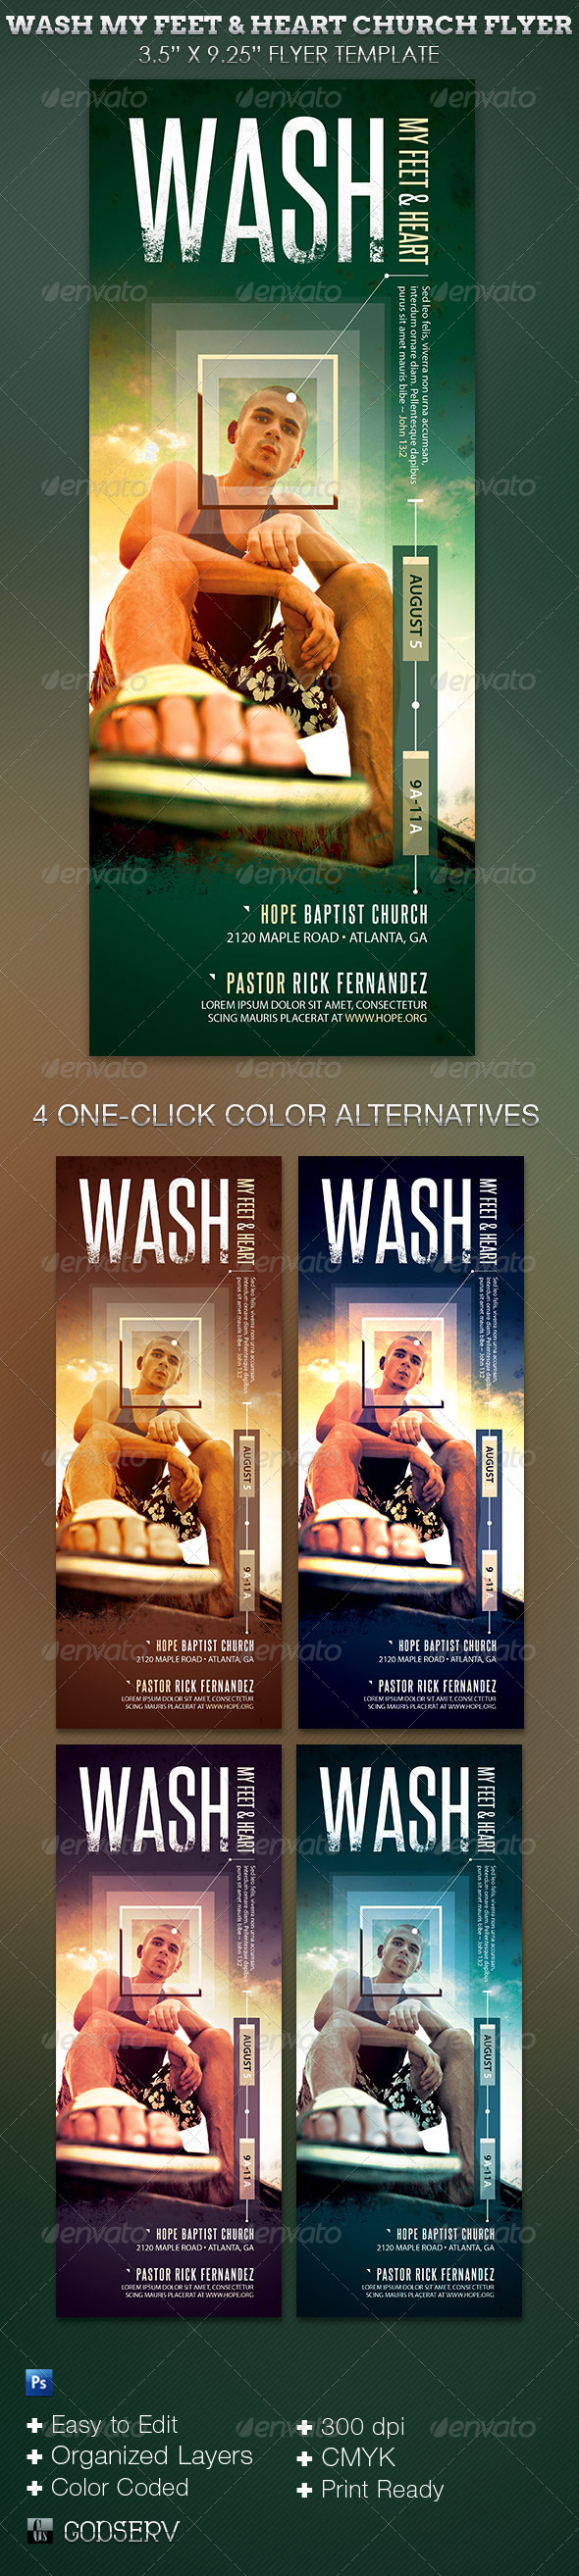 Wash-My-Feet-and-Heart-Church-Flyer-Template-Preview